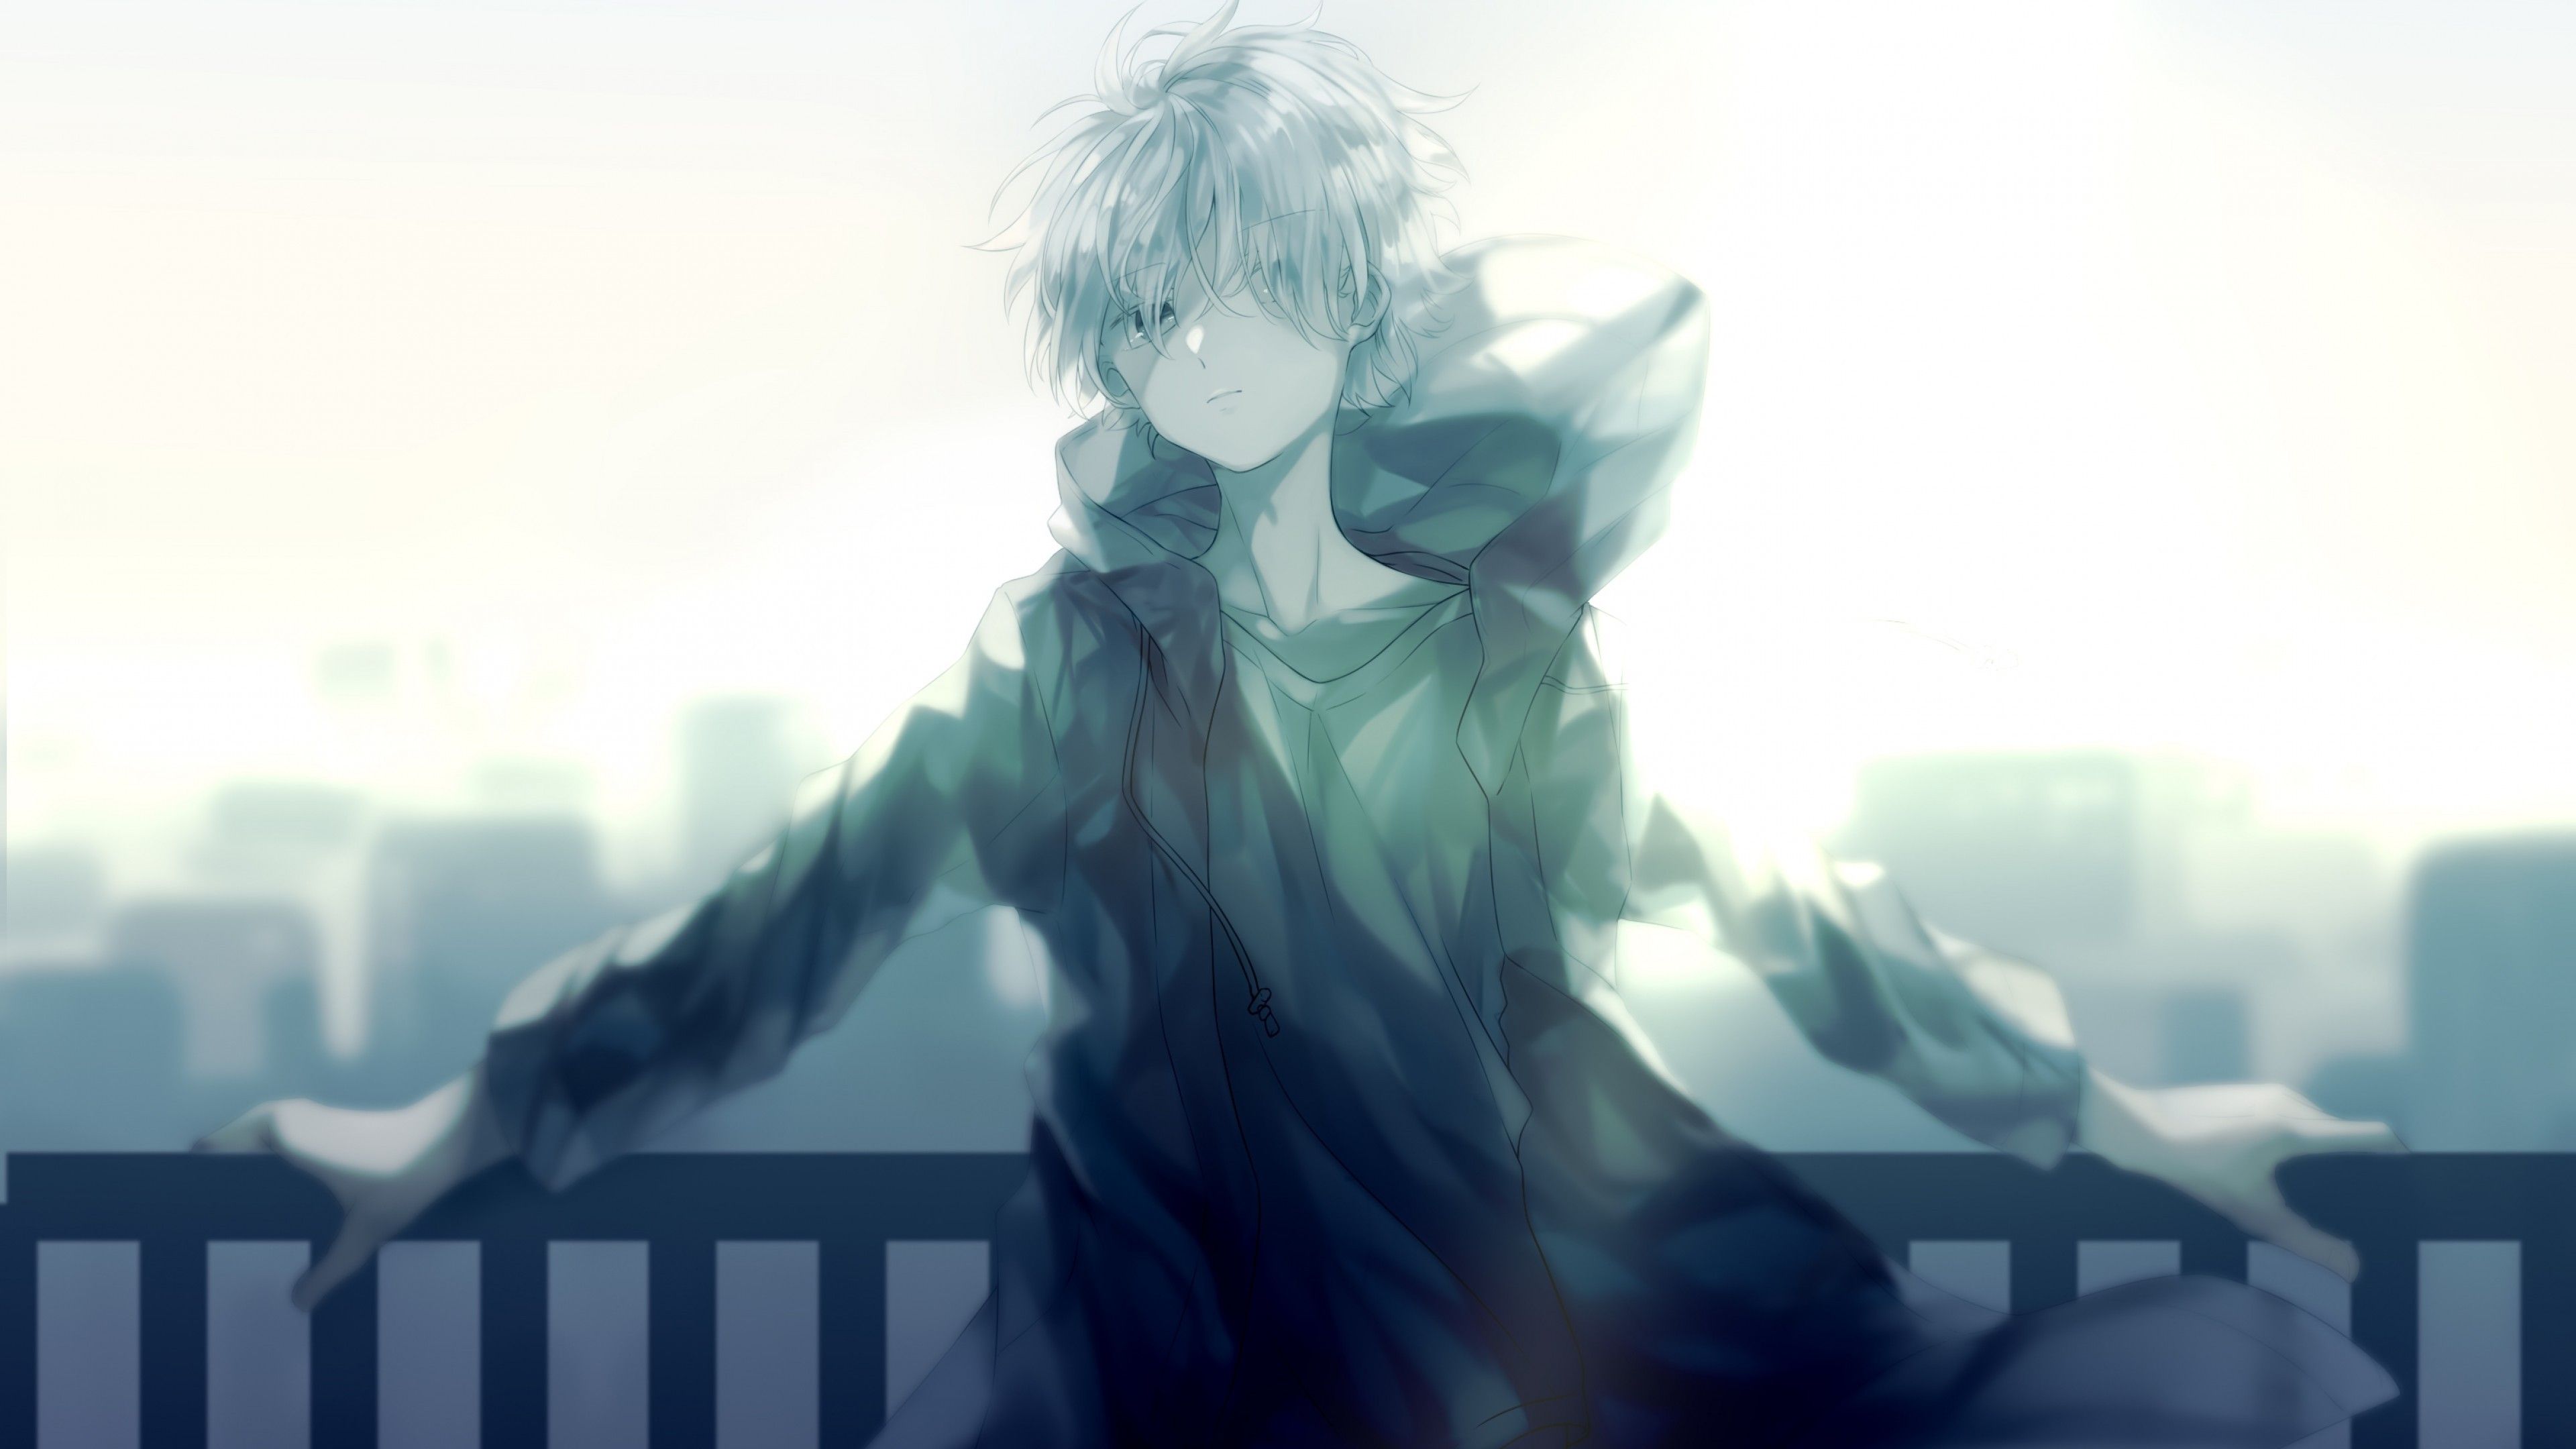 Download 3840x2160 Cool Anime Boy, Hoodie, White Hair, Fence, Cityscape Wallpaper for UHD TV